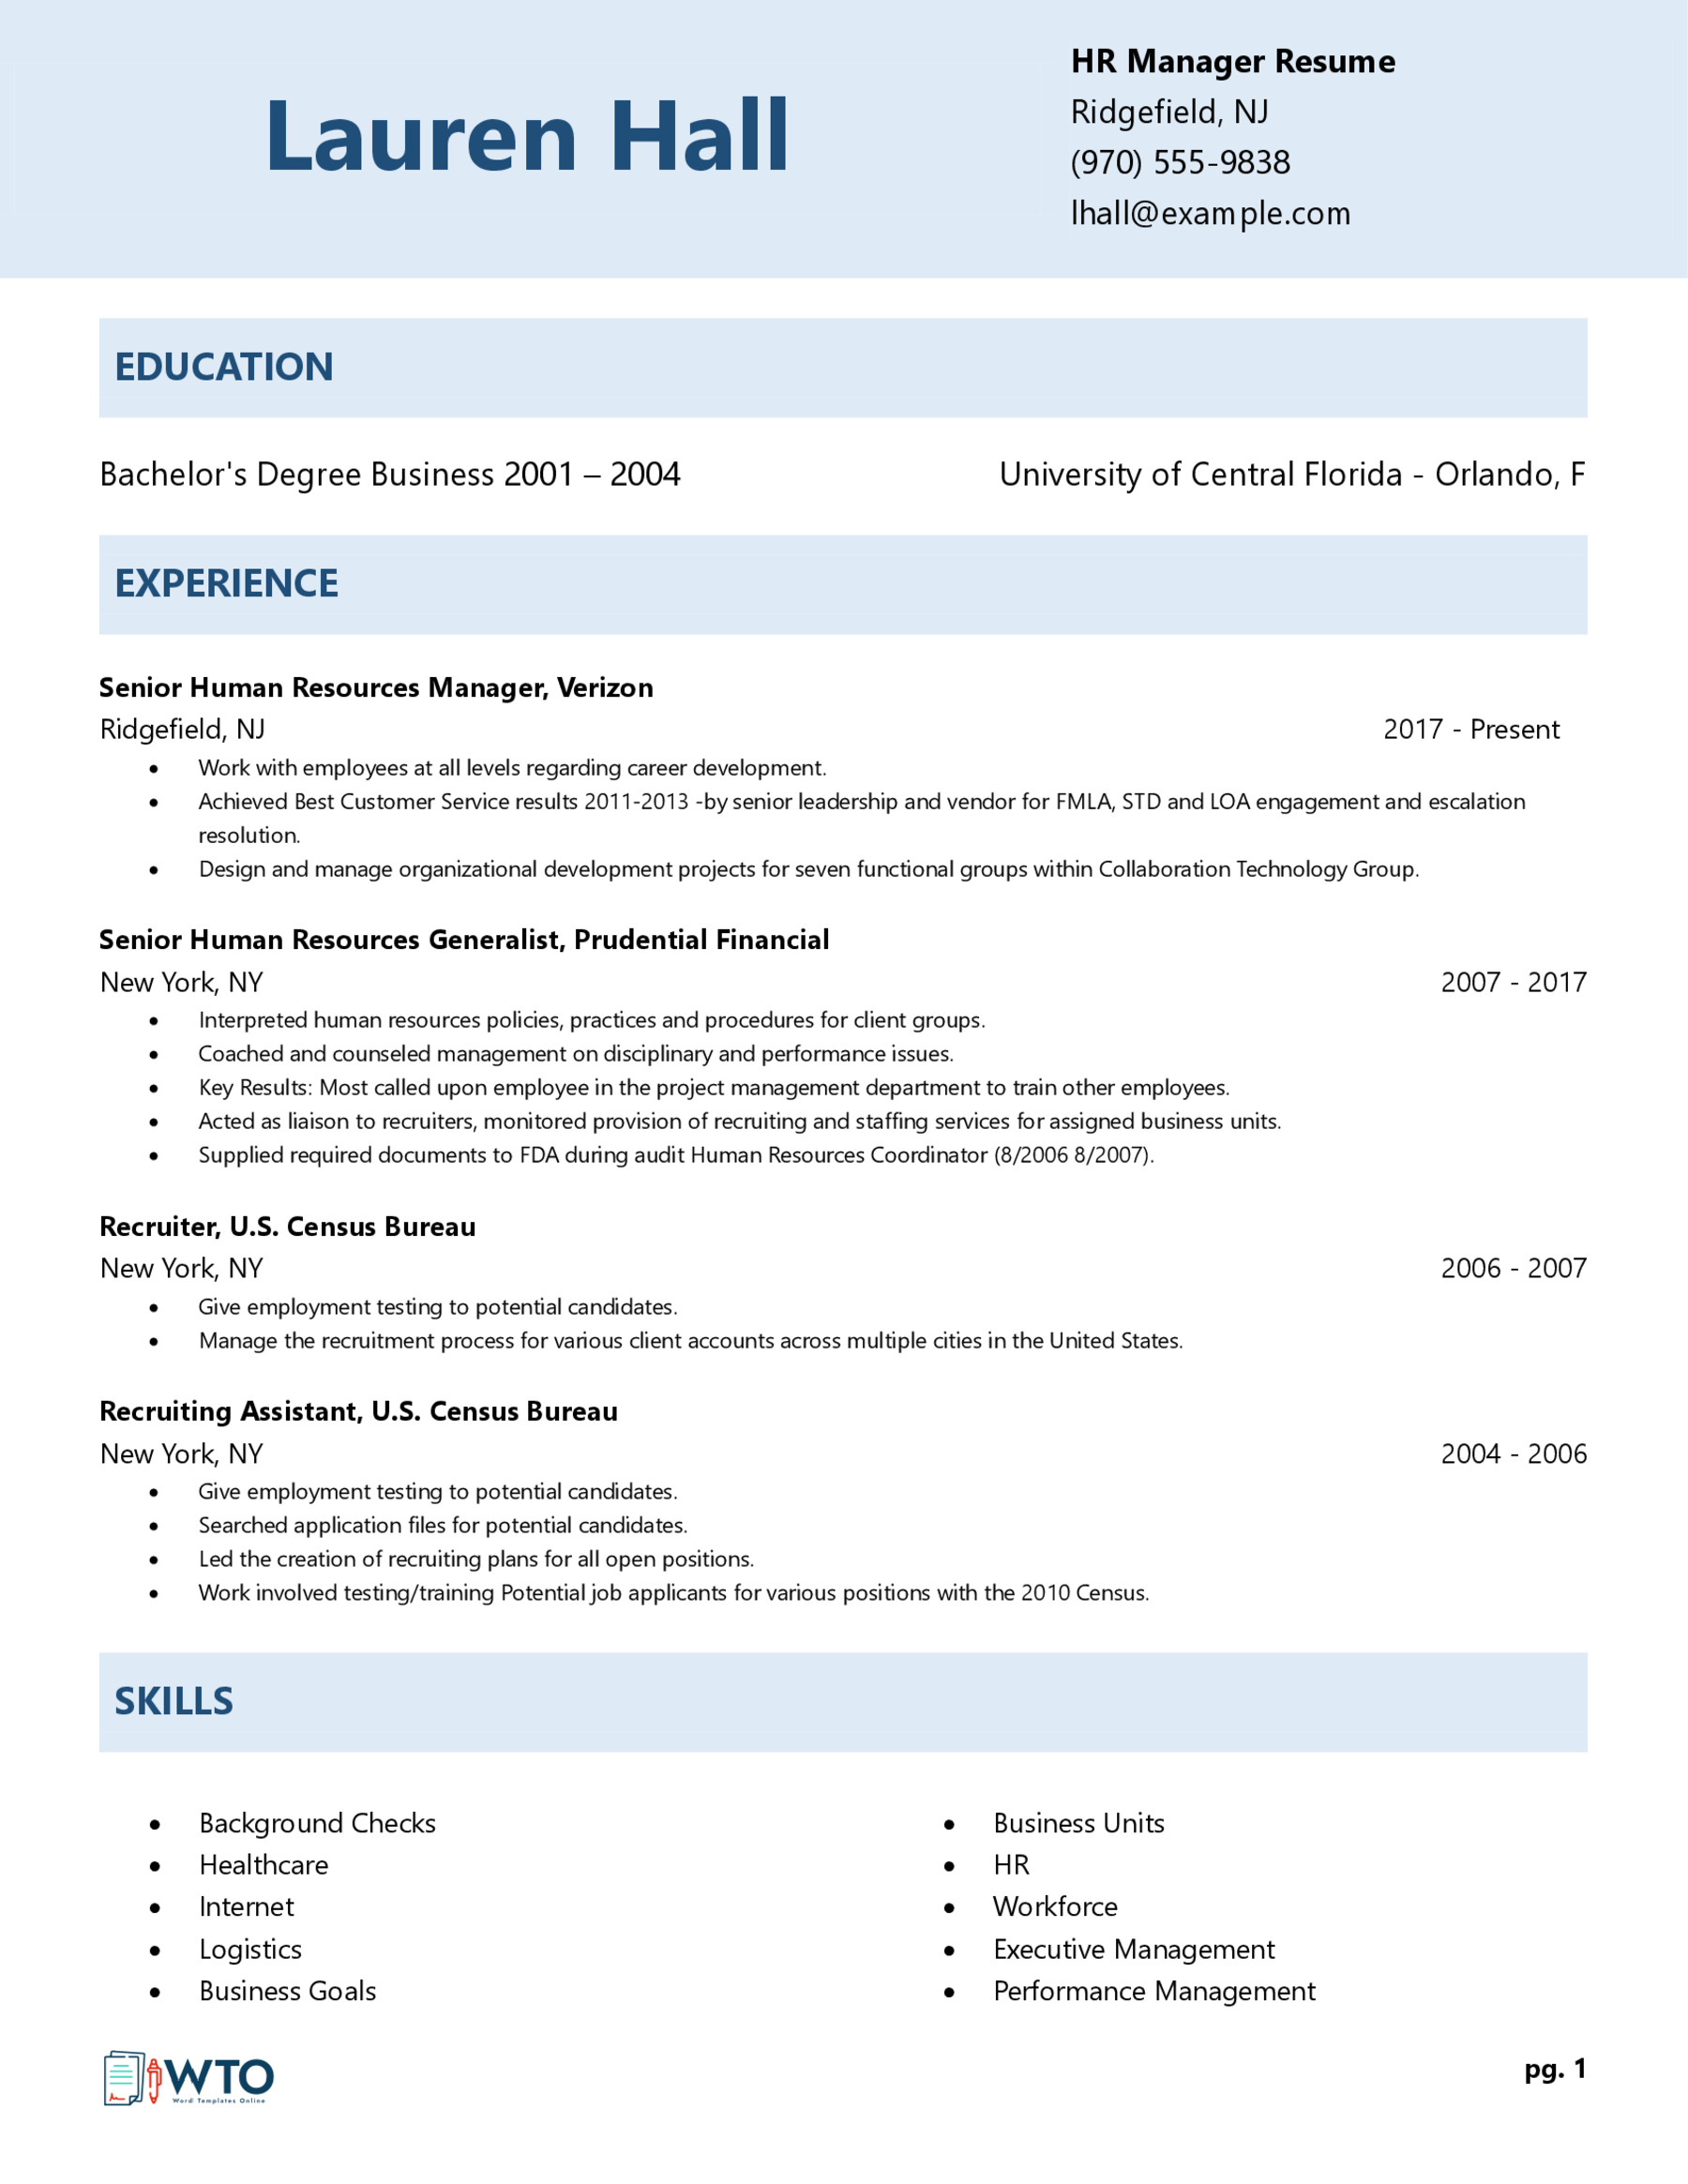 HR Manager Resume Template - Printable Form